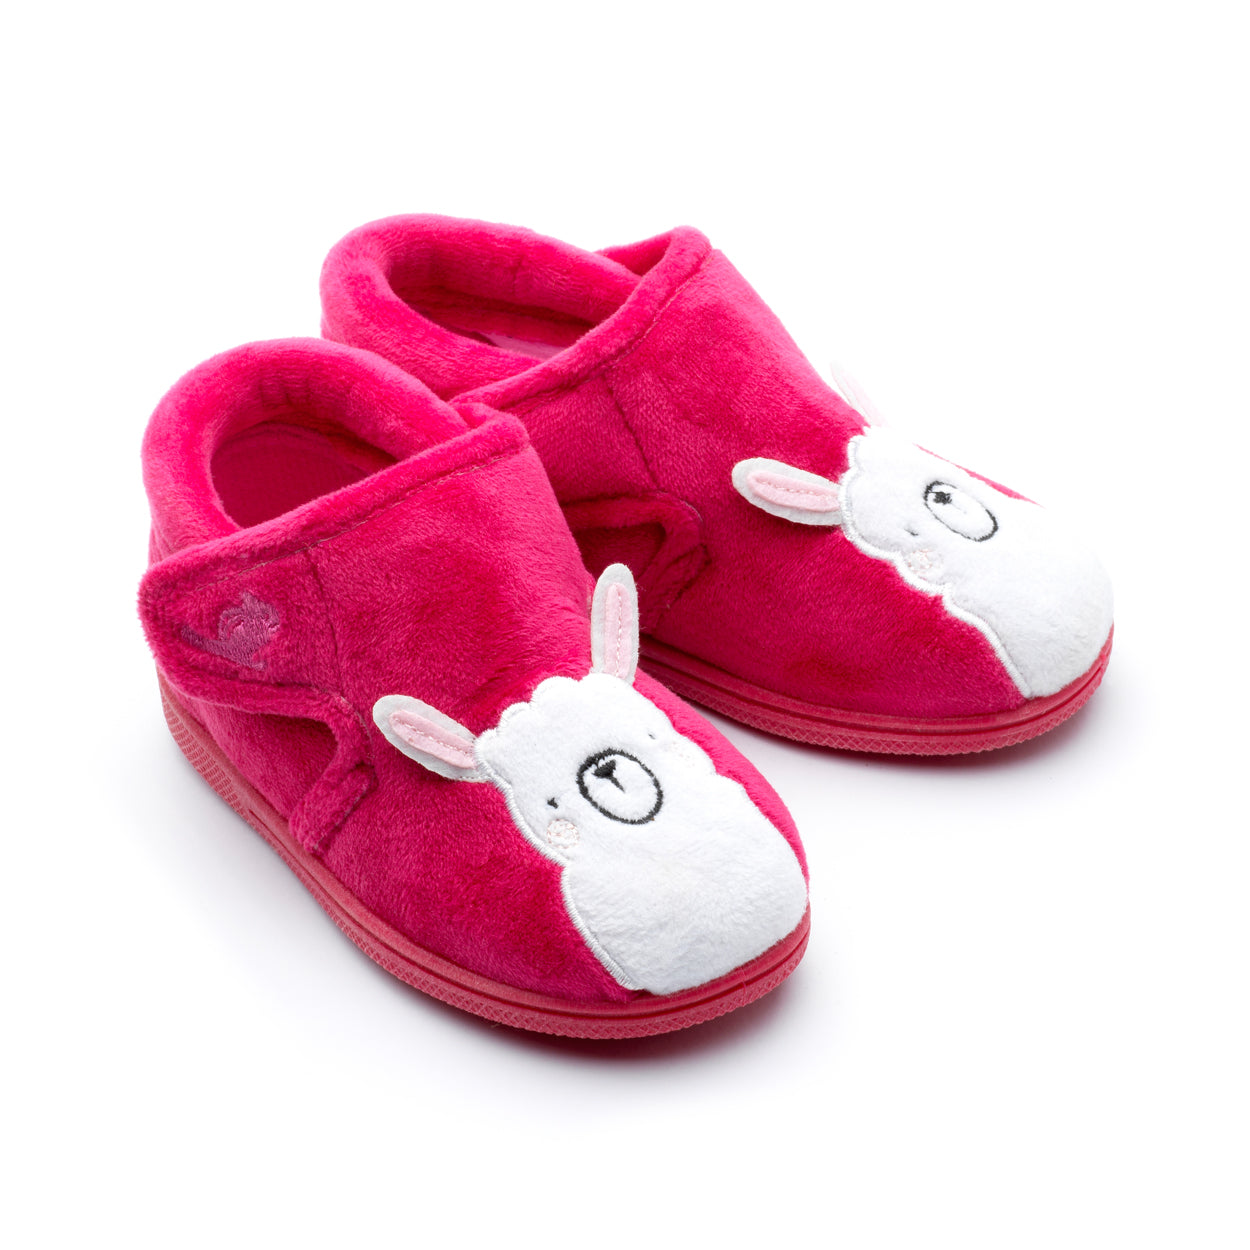 A pair of girls slippers by Chipmunks, style Lexi Llama, in pink and white with llama design and velcro fastening. Angled view.